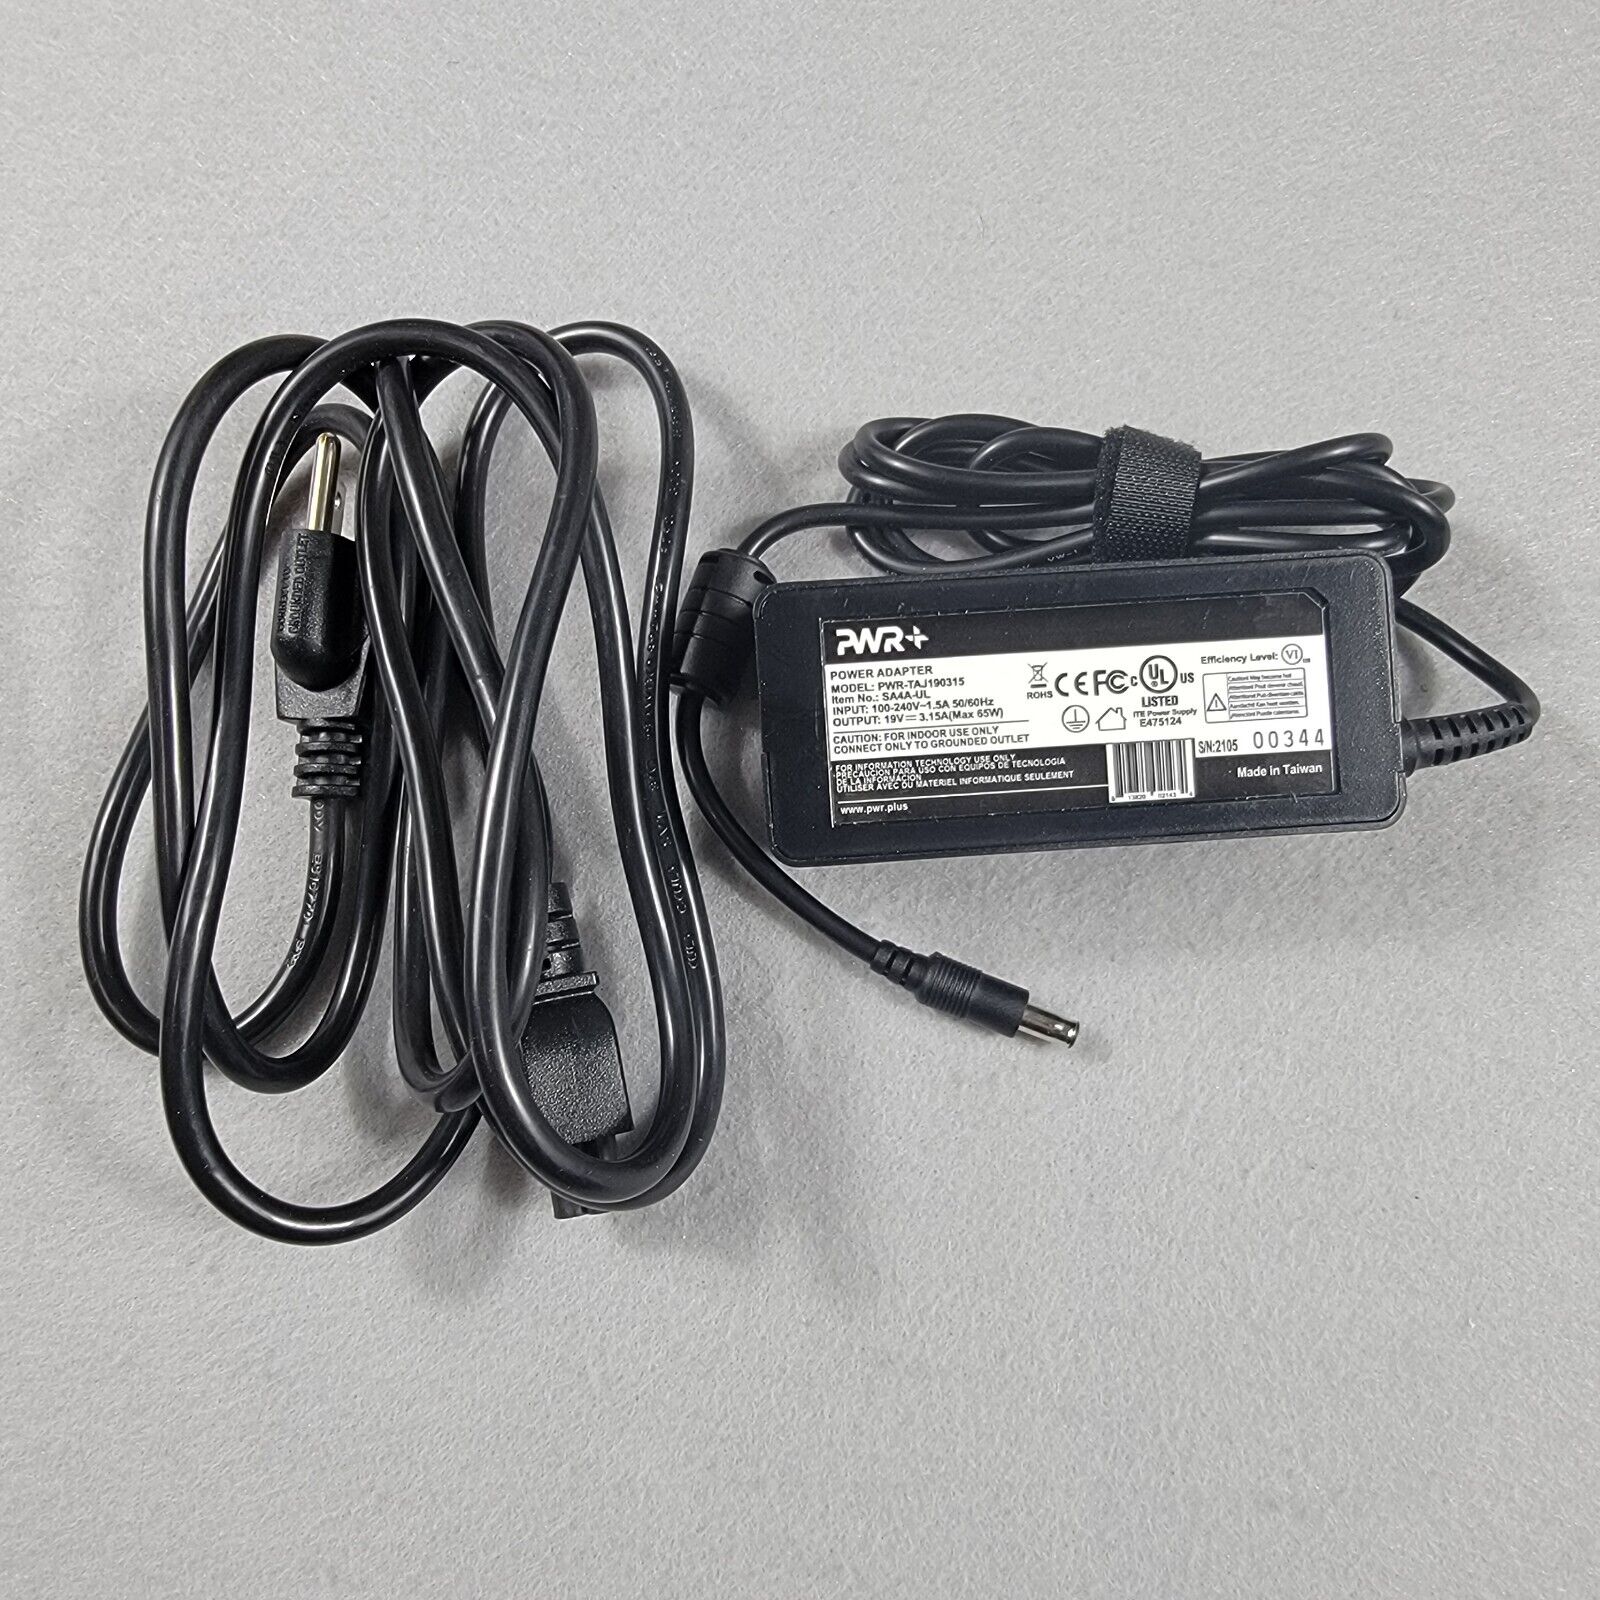 PWR+ SA4A-UL Samsung Laptop Charger AC Power Adapter 19V 3.15A 60W